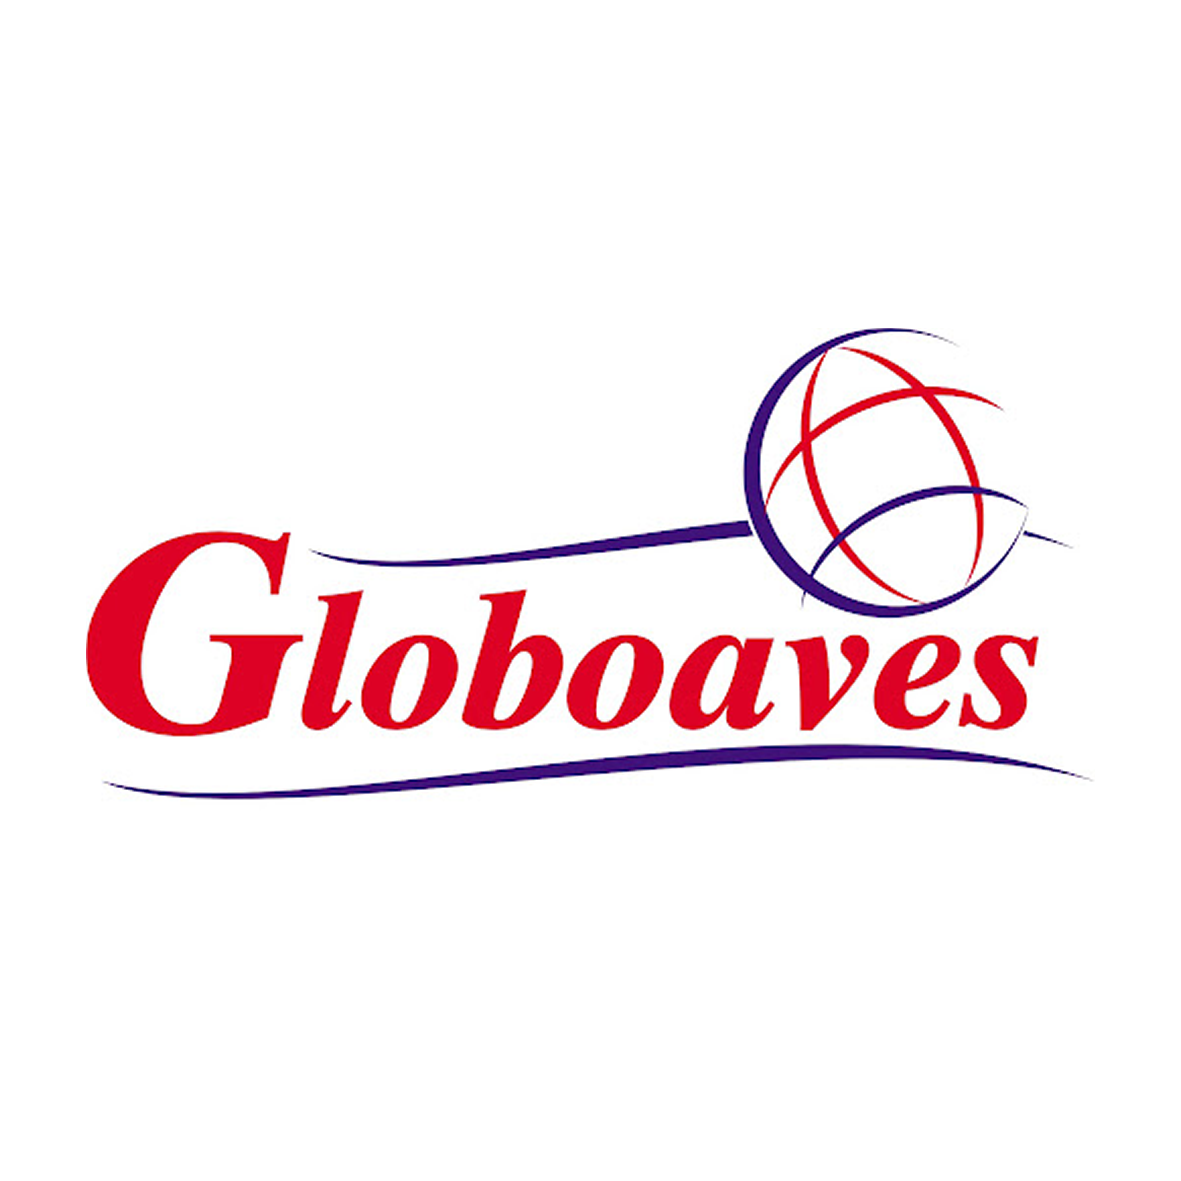 Glovoaves